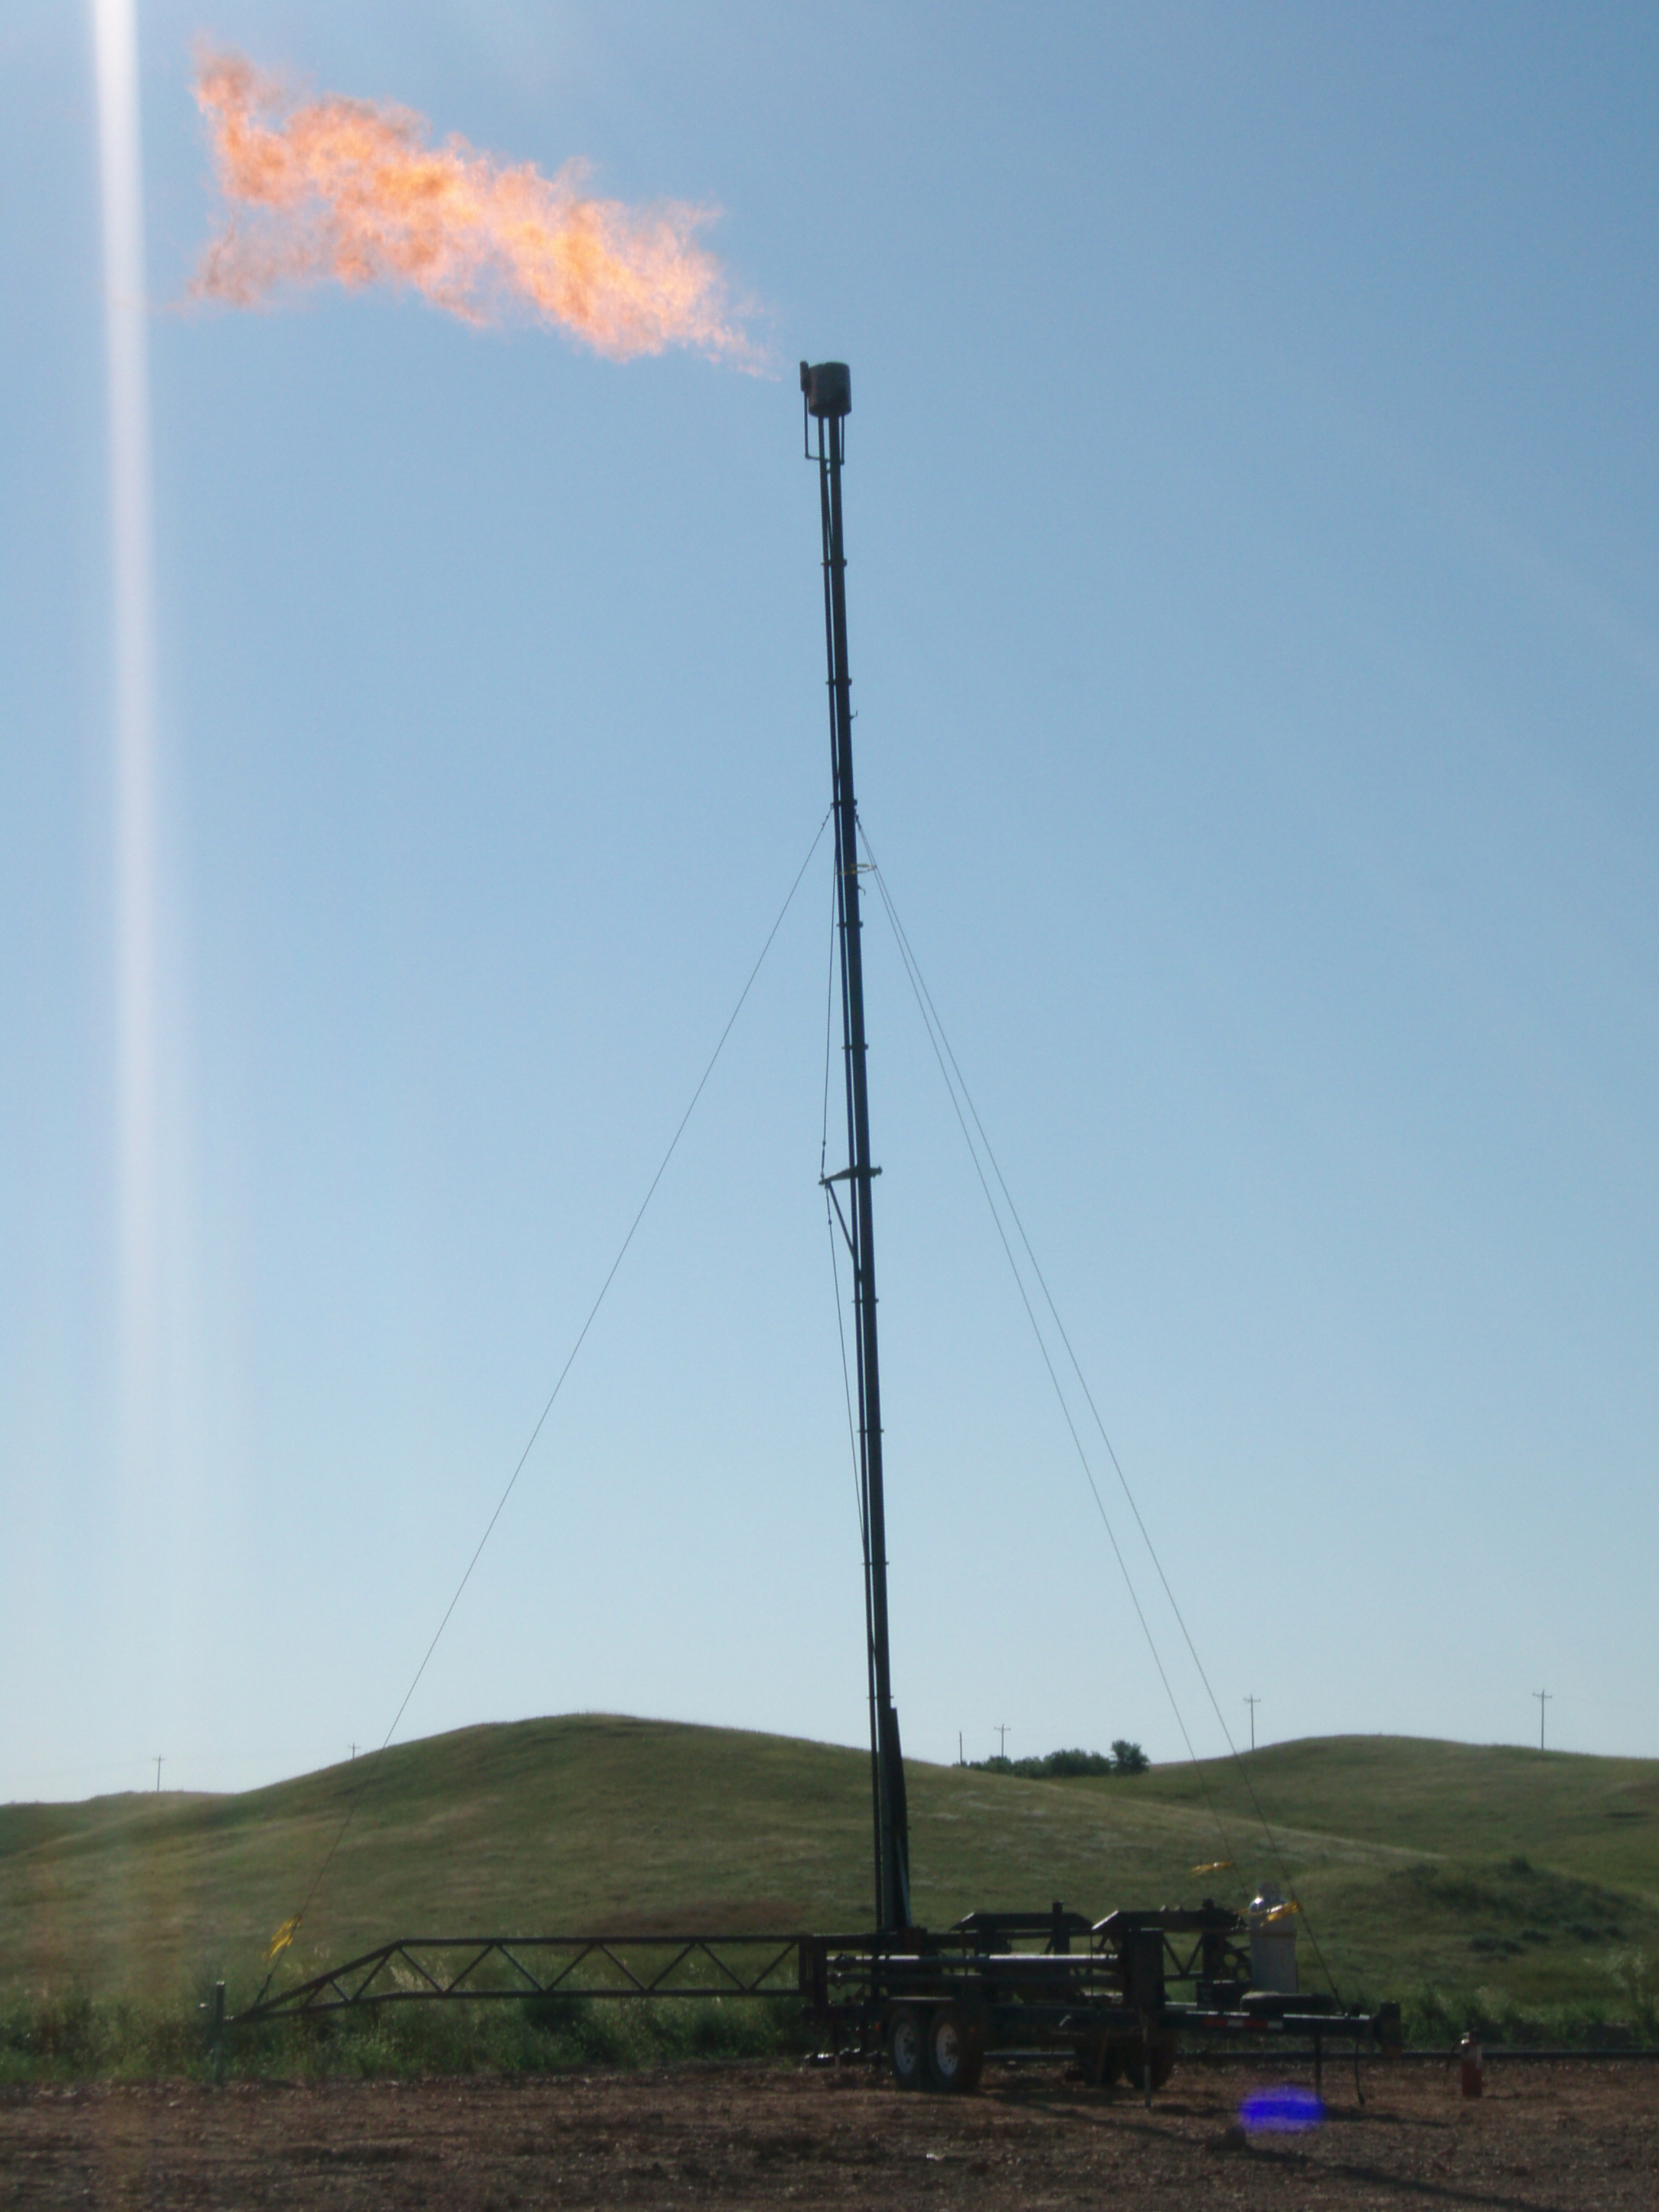 Uncaptured natural gas being flared off in the Bakken oil field, converting the methane to carbon dioxide.